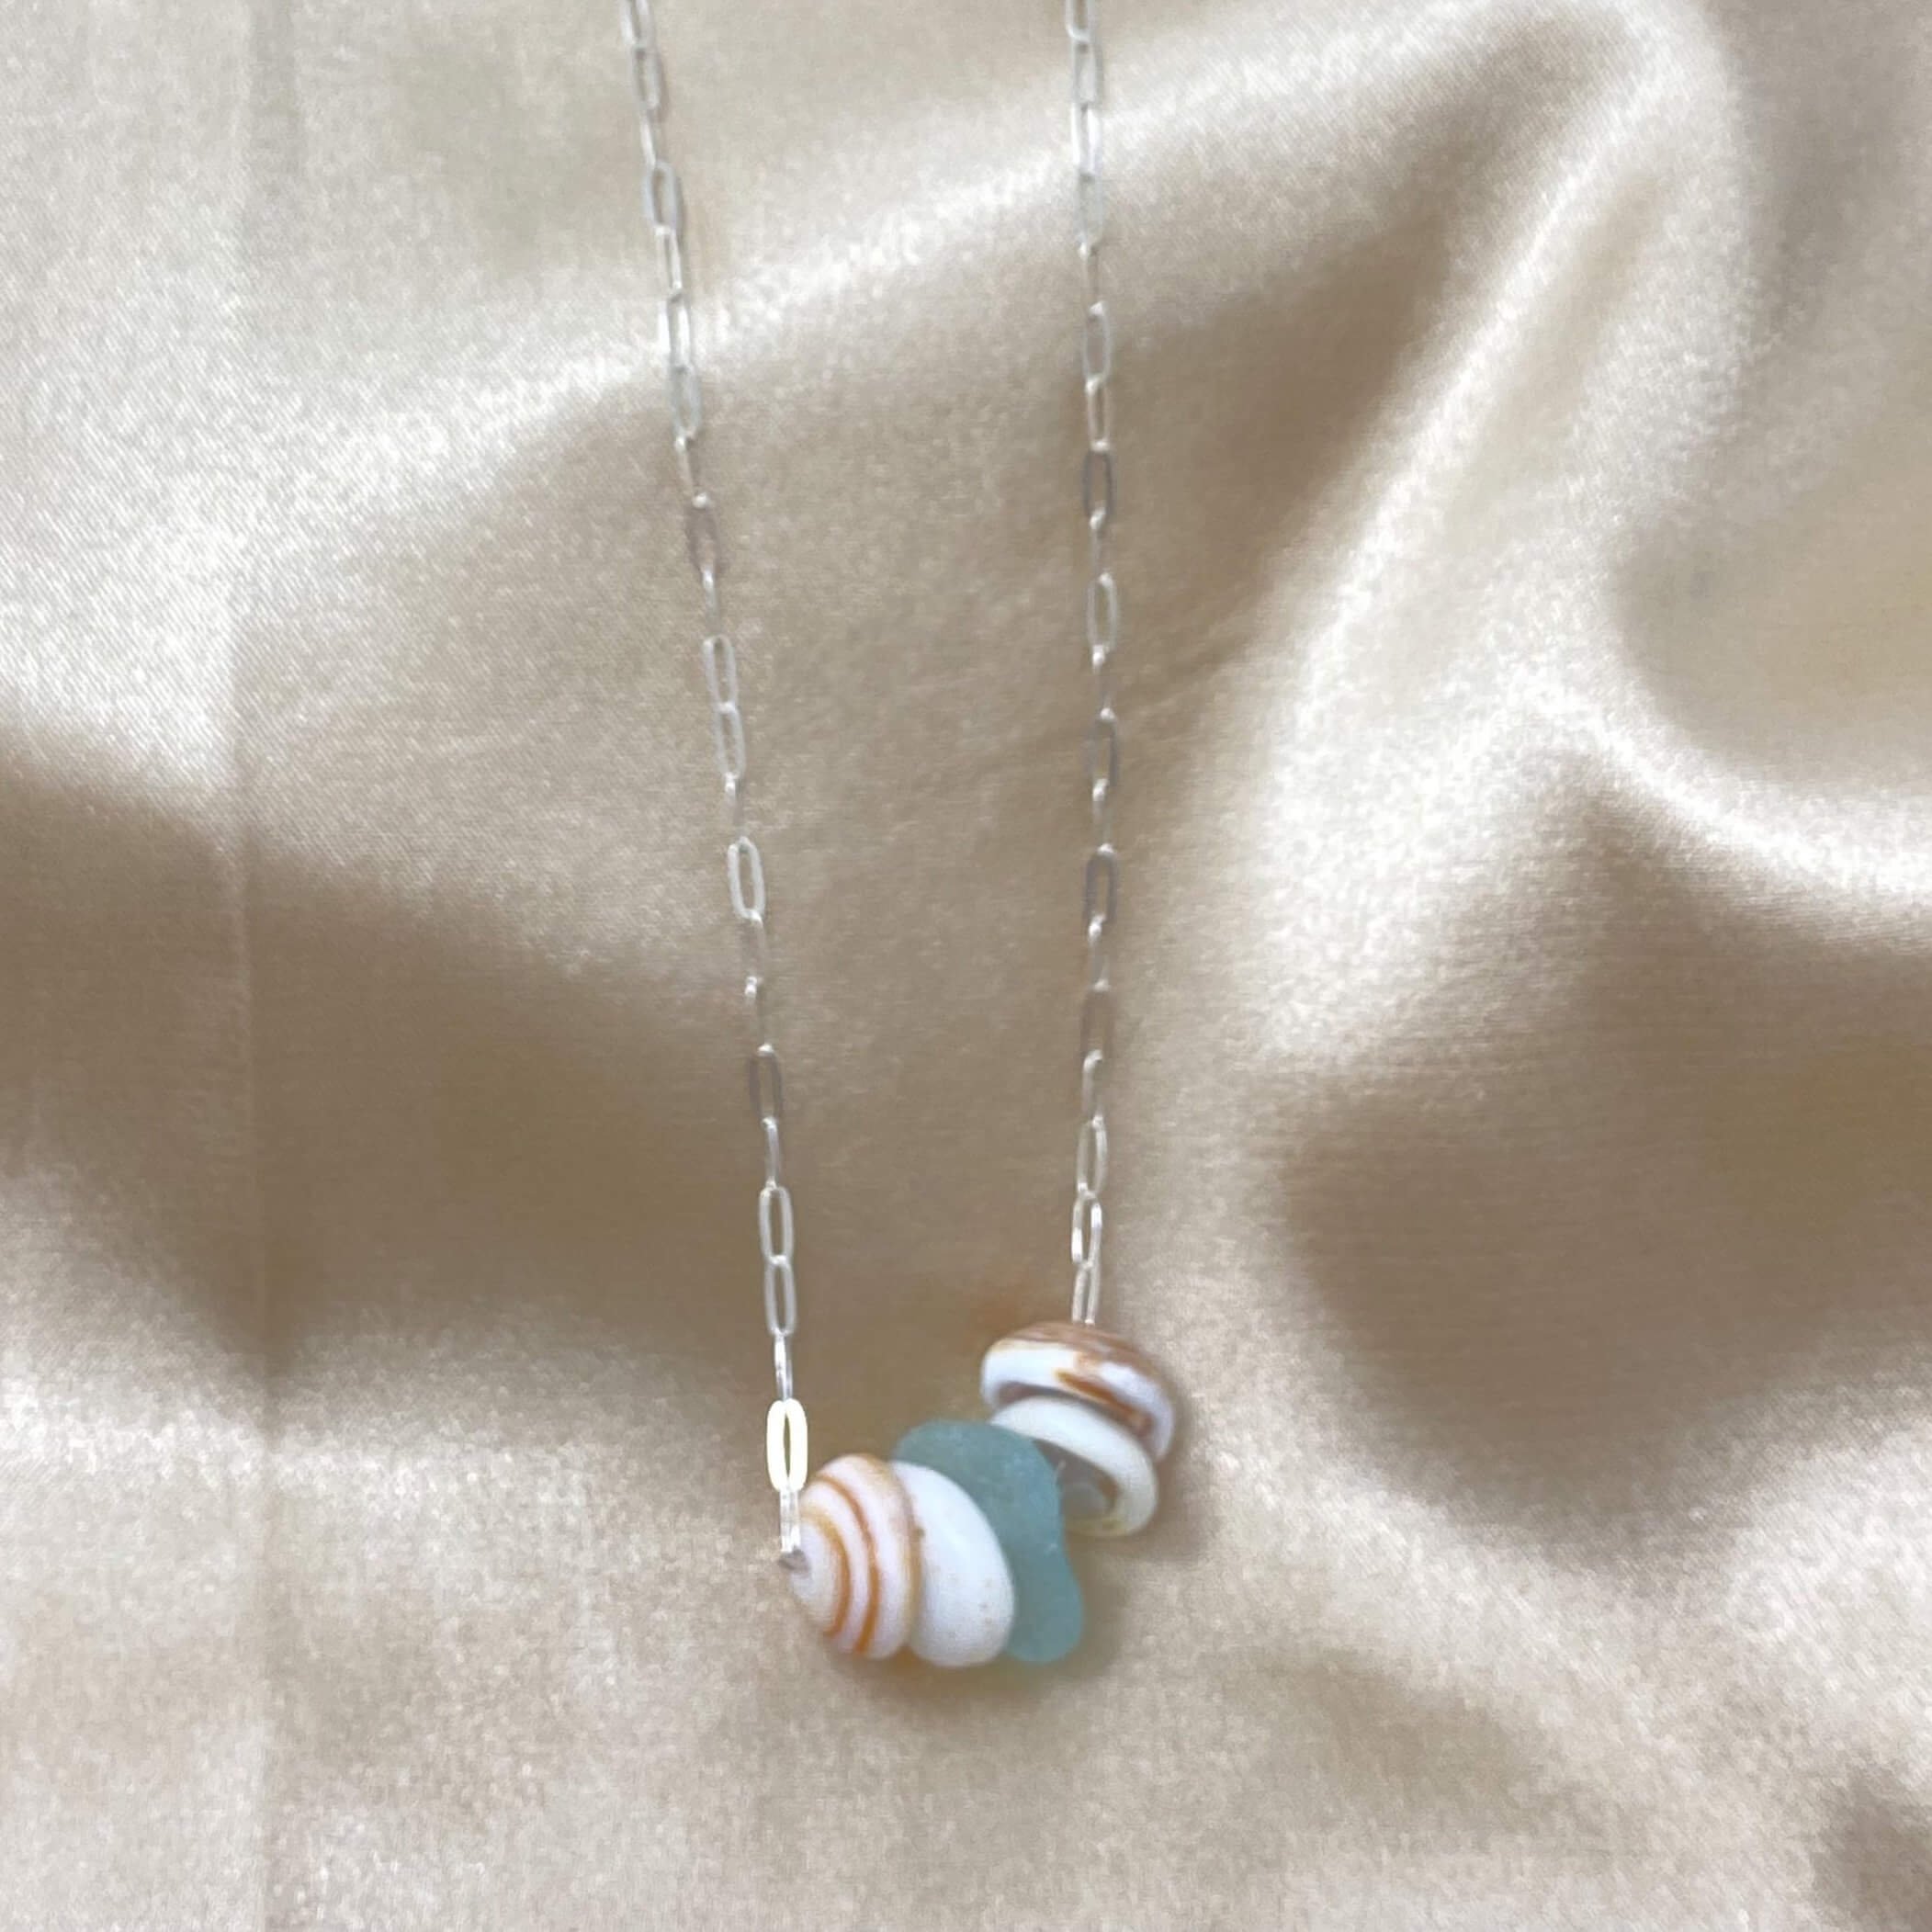 Scallop shell imprinted necklace from Long Beach in Tofino, Vancouver Island